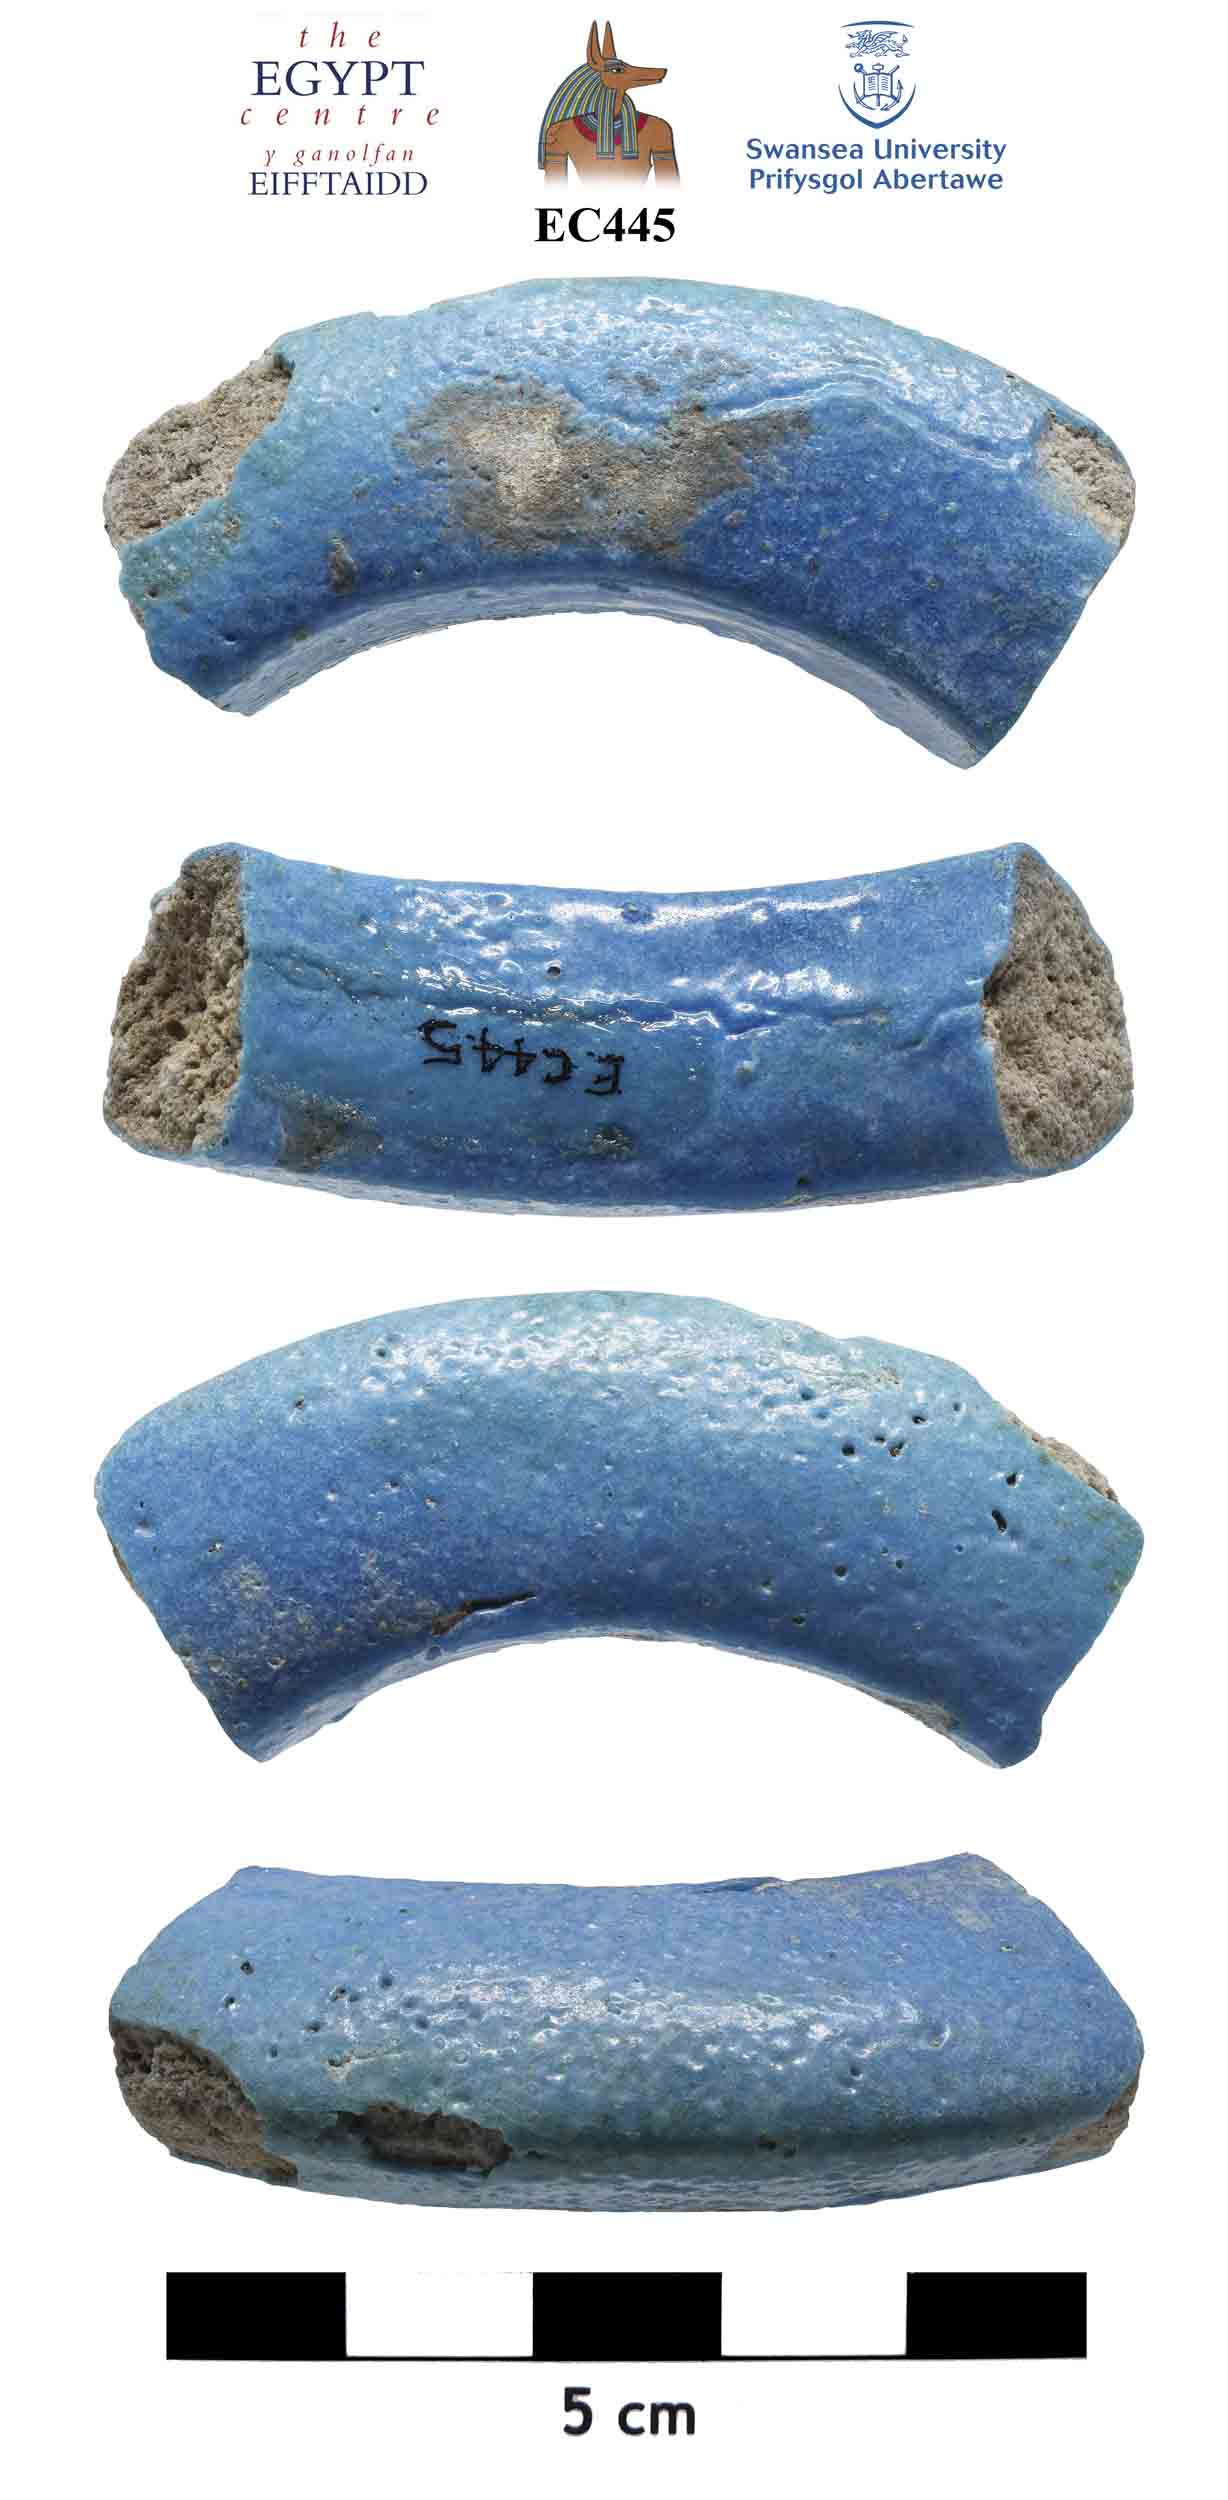 Image for: Faience object, possibly part of a faience ankh